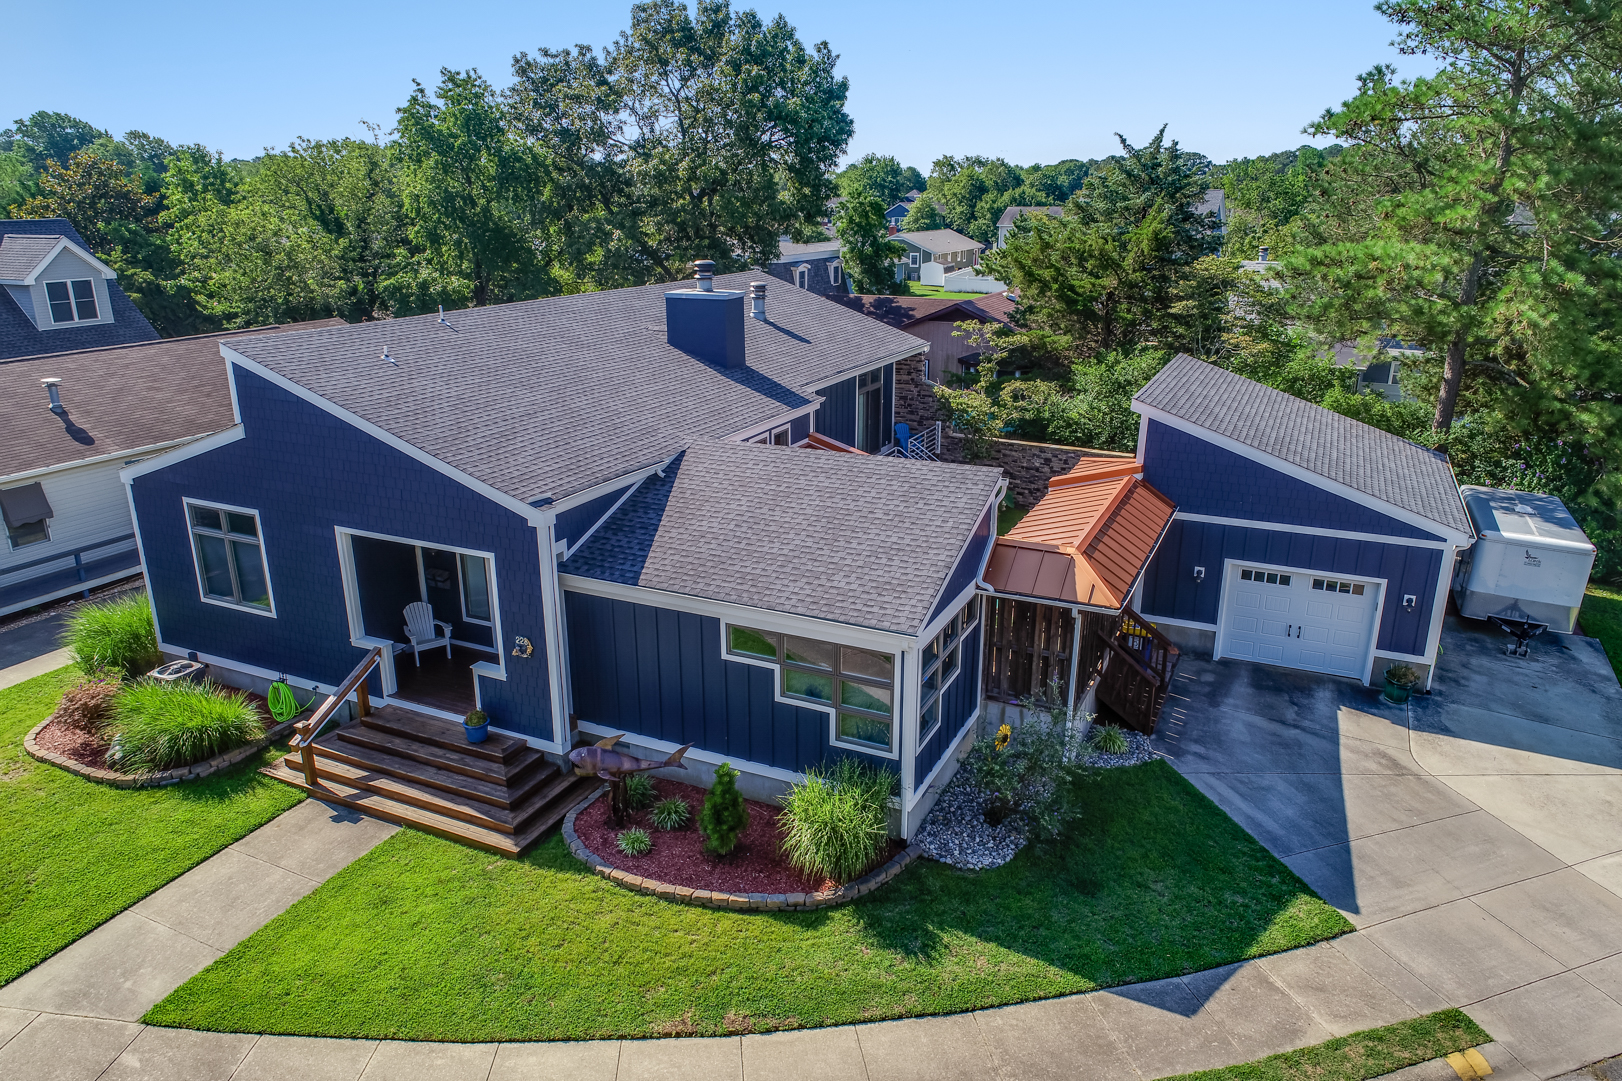 DJI_0006 Unique Opportunity in Downtown Rehoboth Beach! - Jack Lingo REALTOR